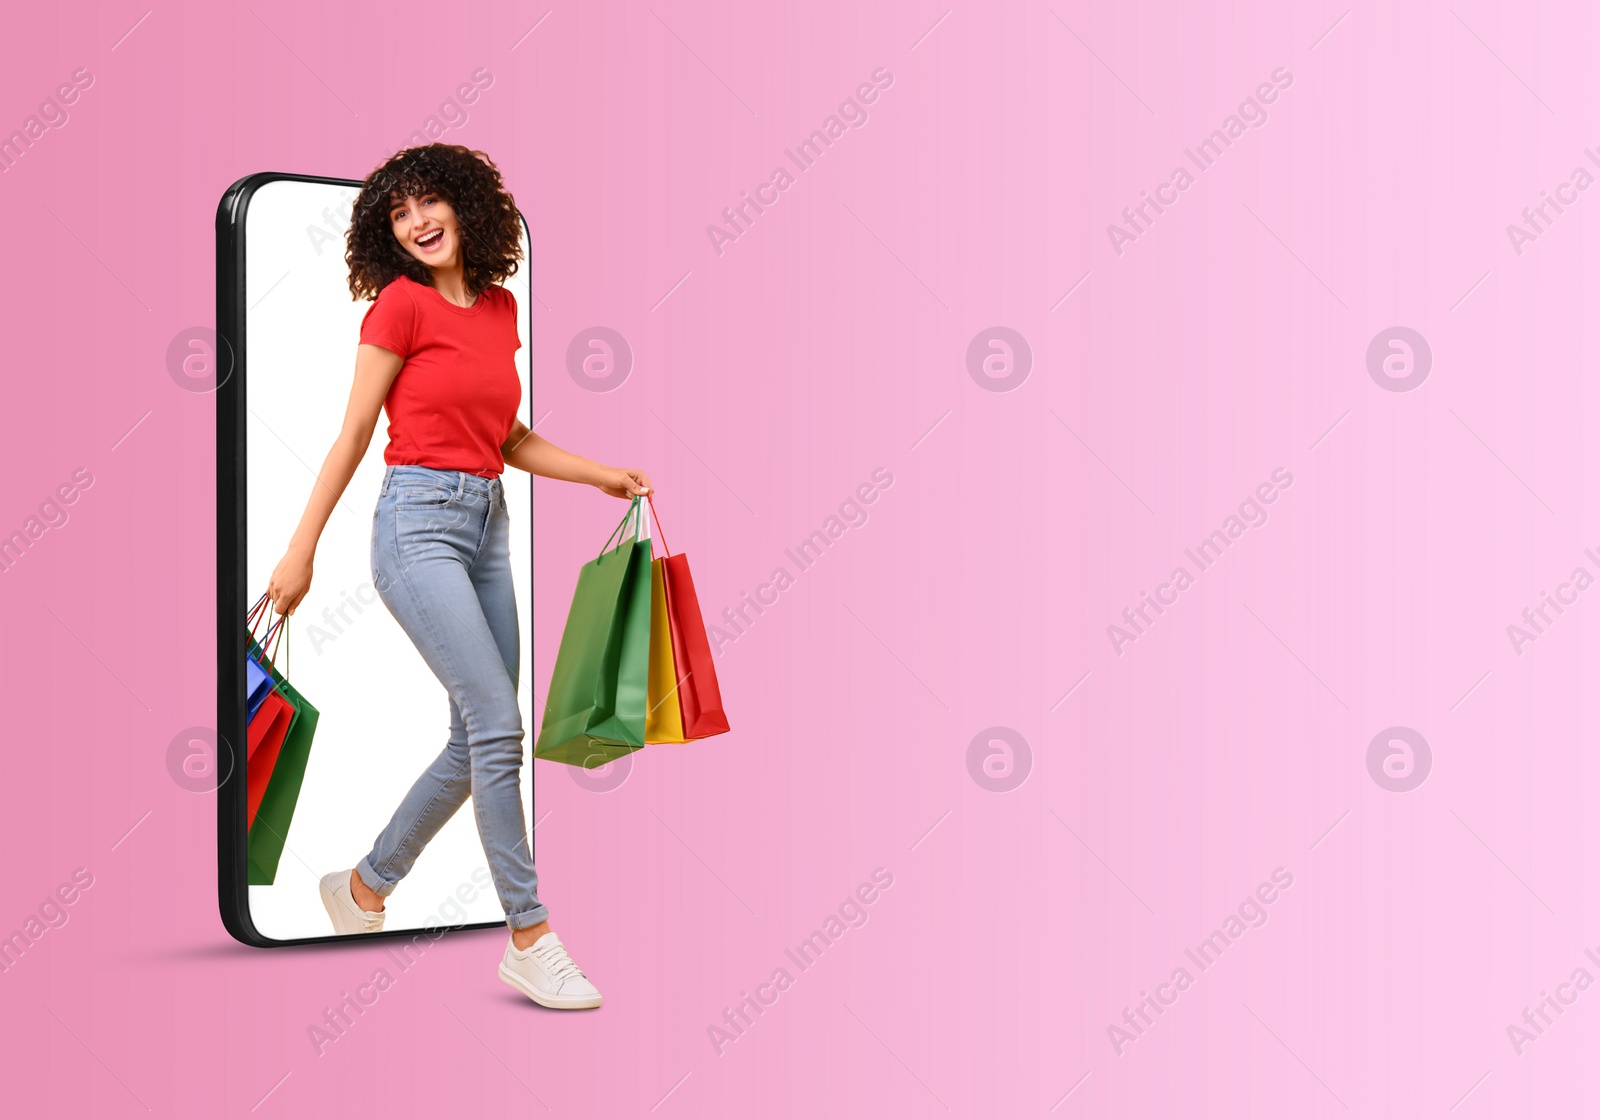 Image of Online shopping. Happy woman with paper bags walking out from smartphone on pink background, space for text